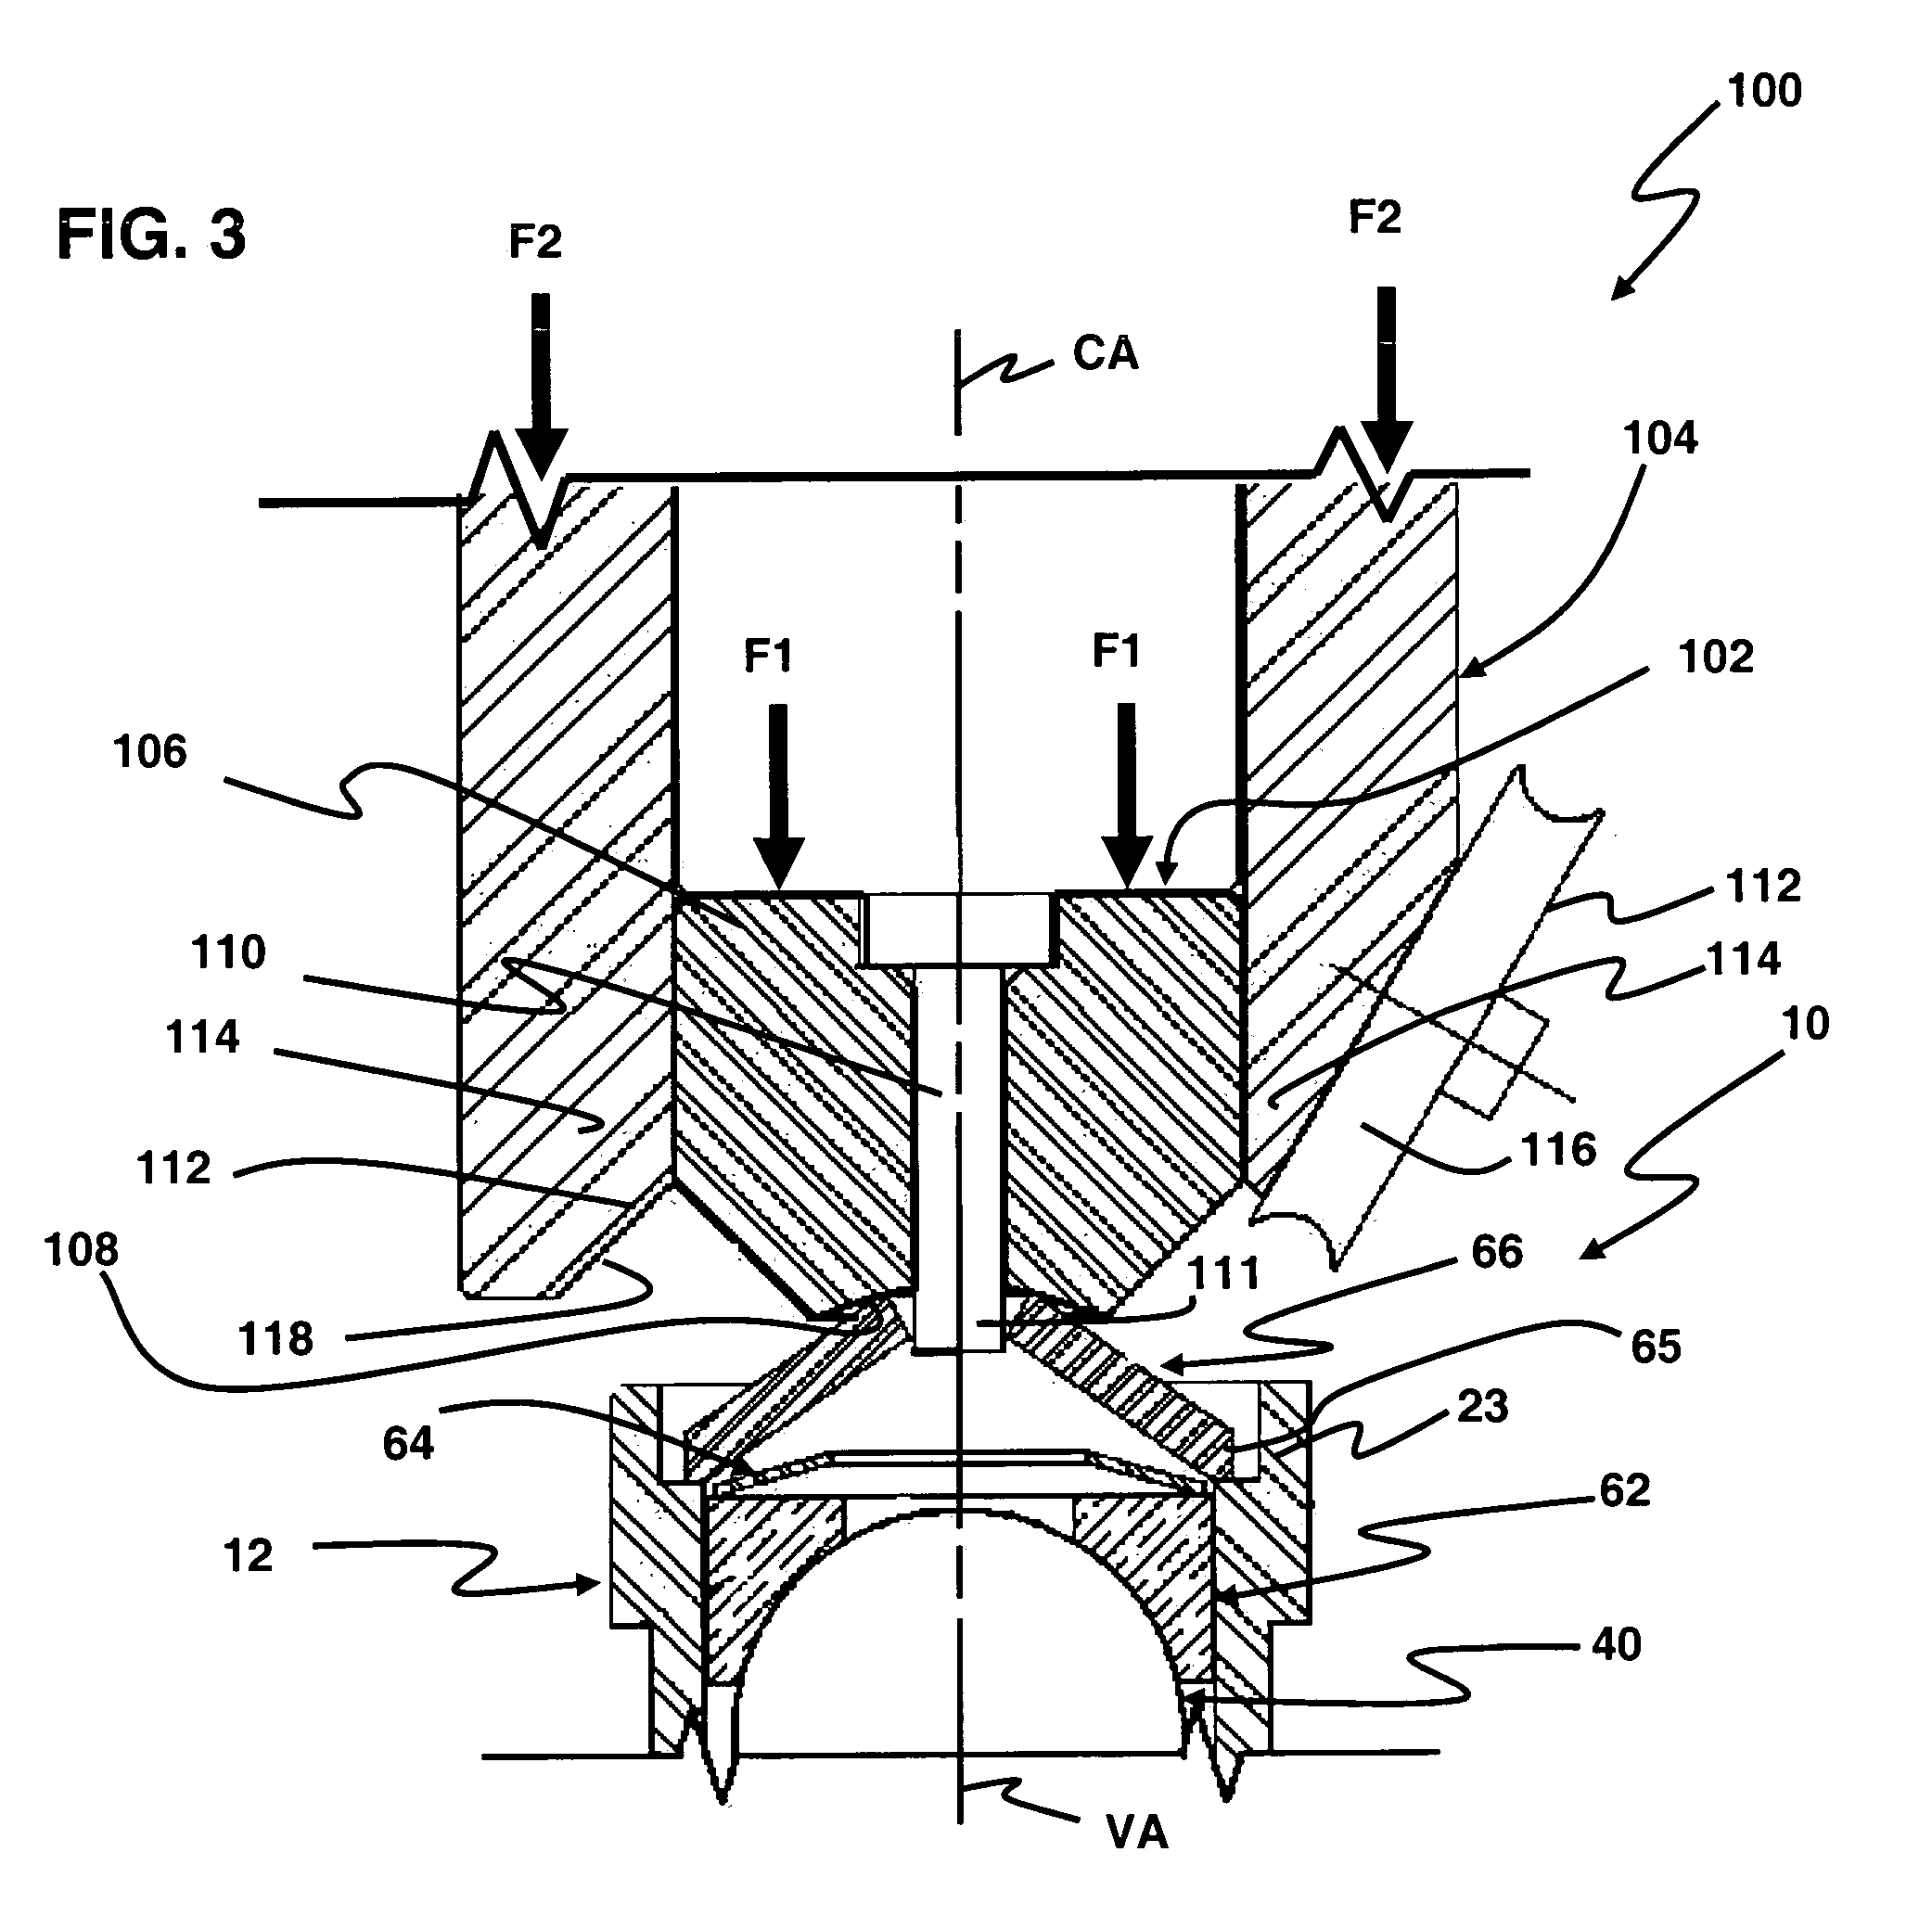 Method and apparatus for clearance adjusting cover plate closure